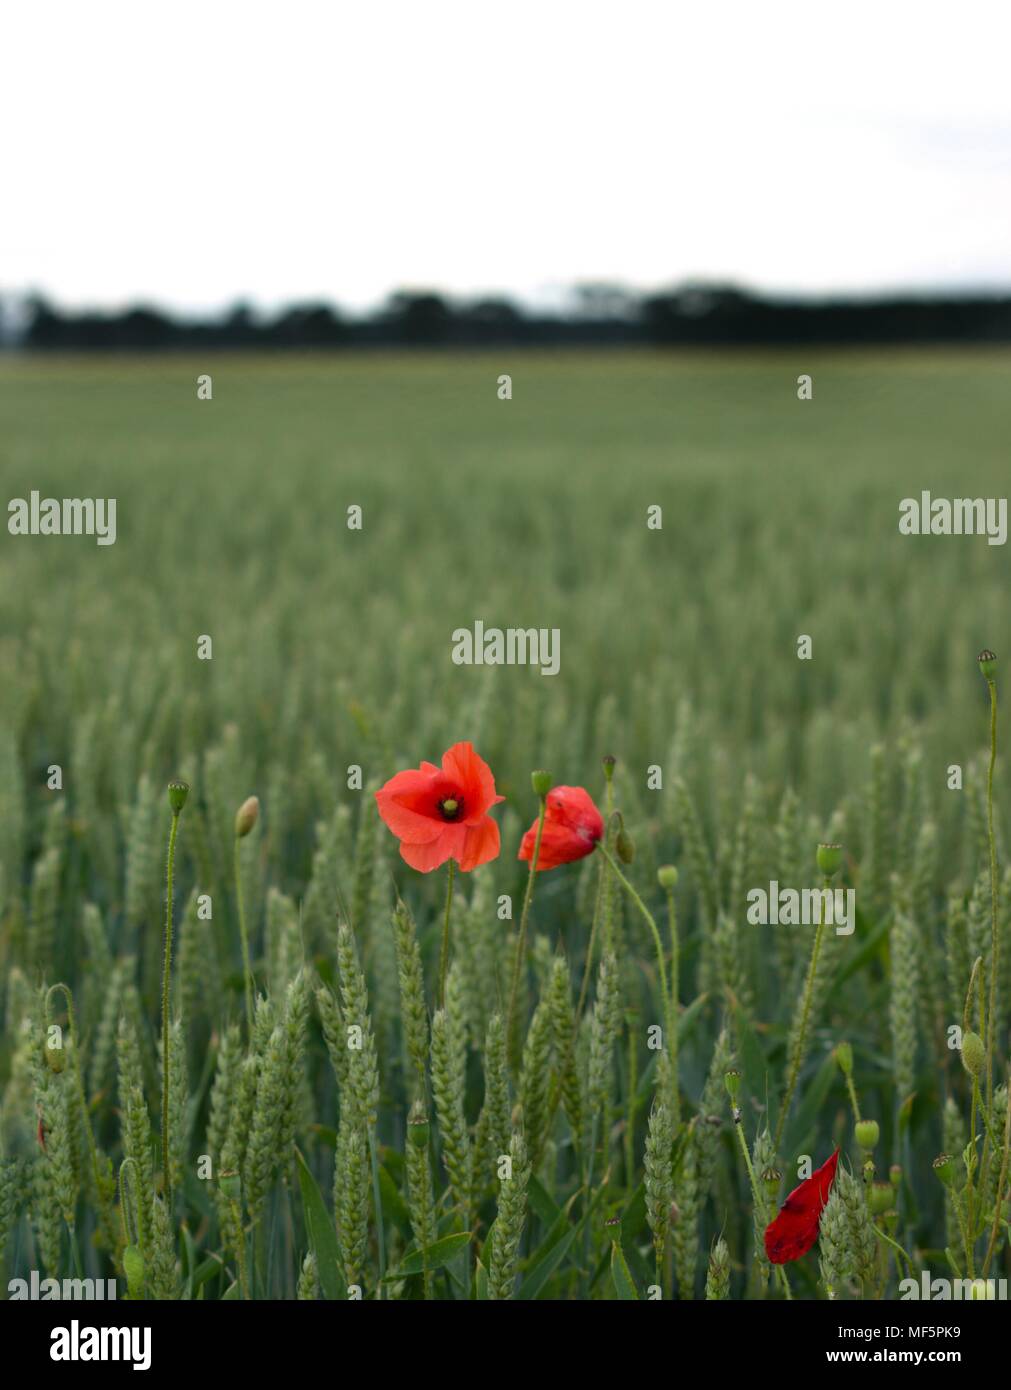 Poppies in a wheat field Stock Photo